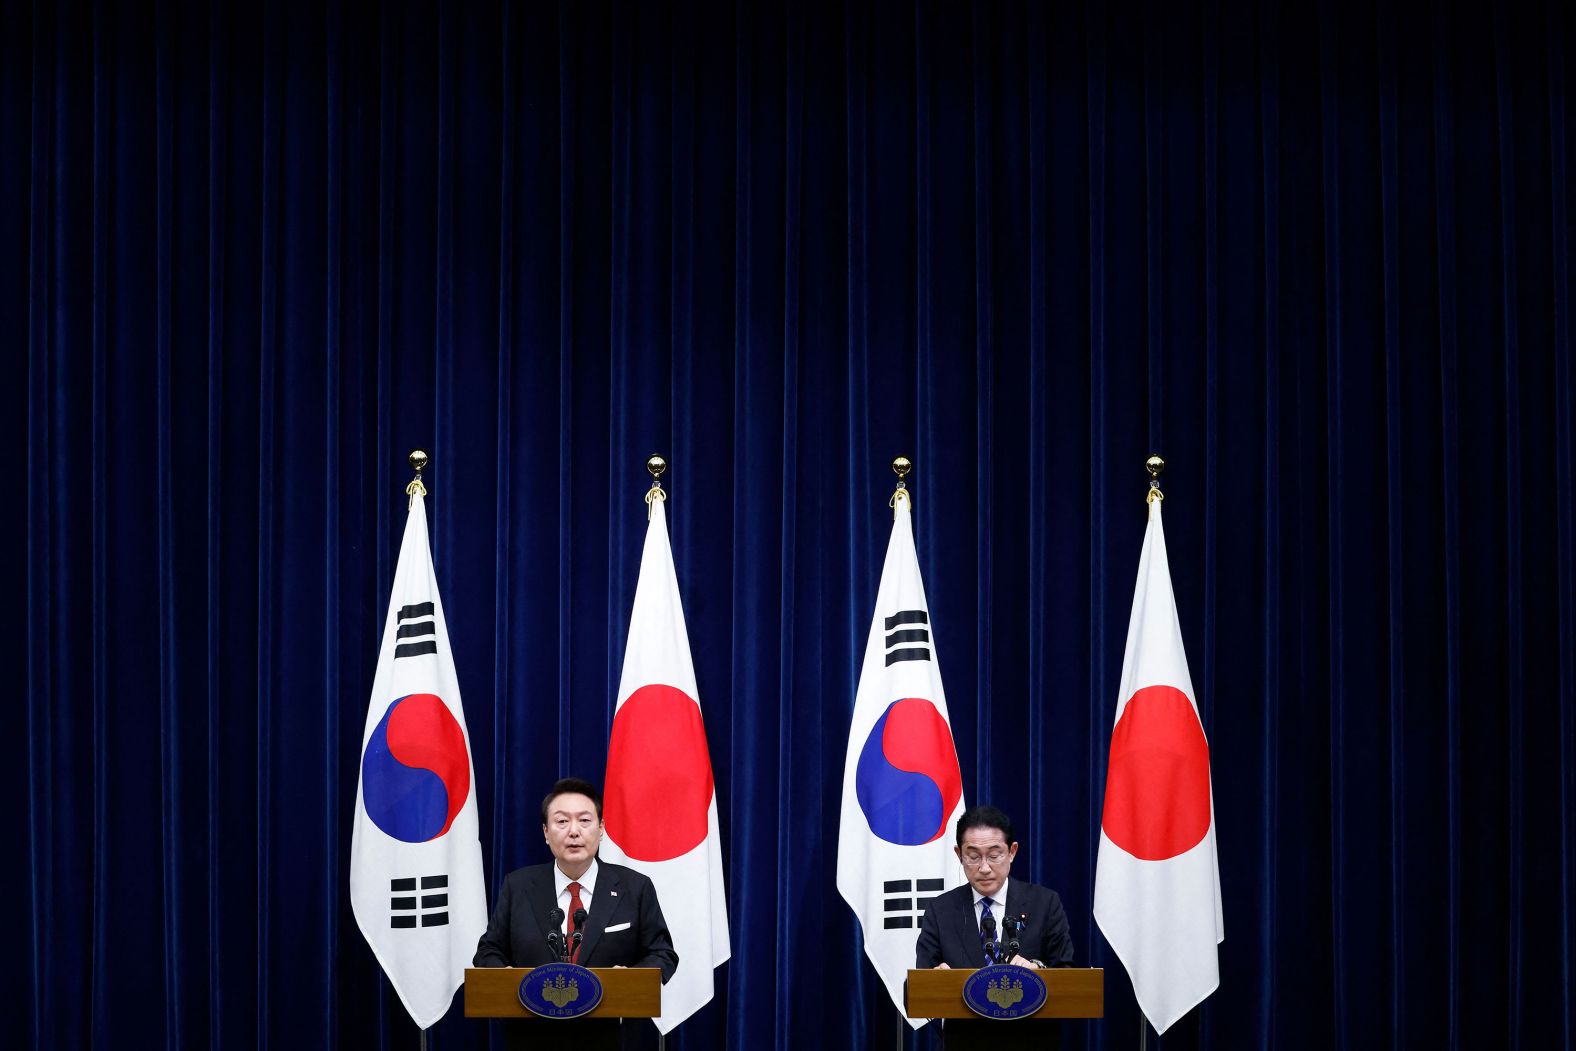 South Korean President Yoon Suk Yeol, left, and Japanese Prime Minister Fumio Kishida attend a joint news conference at the prime minister's official residence in Tokyo on Thursday, March 16. The two leaders promised to resume ties in <a href="index.php?page=&url=https%3A%2F%2Fwww.cnn.com%2F2023%2F03%2F15%2Fasia%2Fsouth-korea-yoon-japan-visit-regional-security-int-hnk%2Findex.html" target="_blank">a fence-mending summit</a> -- the first such meeting in 12 years -- as the two neighbors seek to confront threats from North Korea and rising concerns about China.